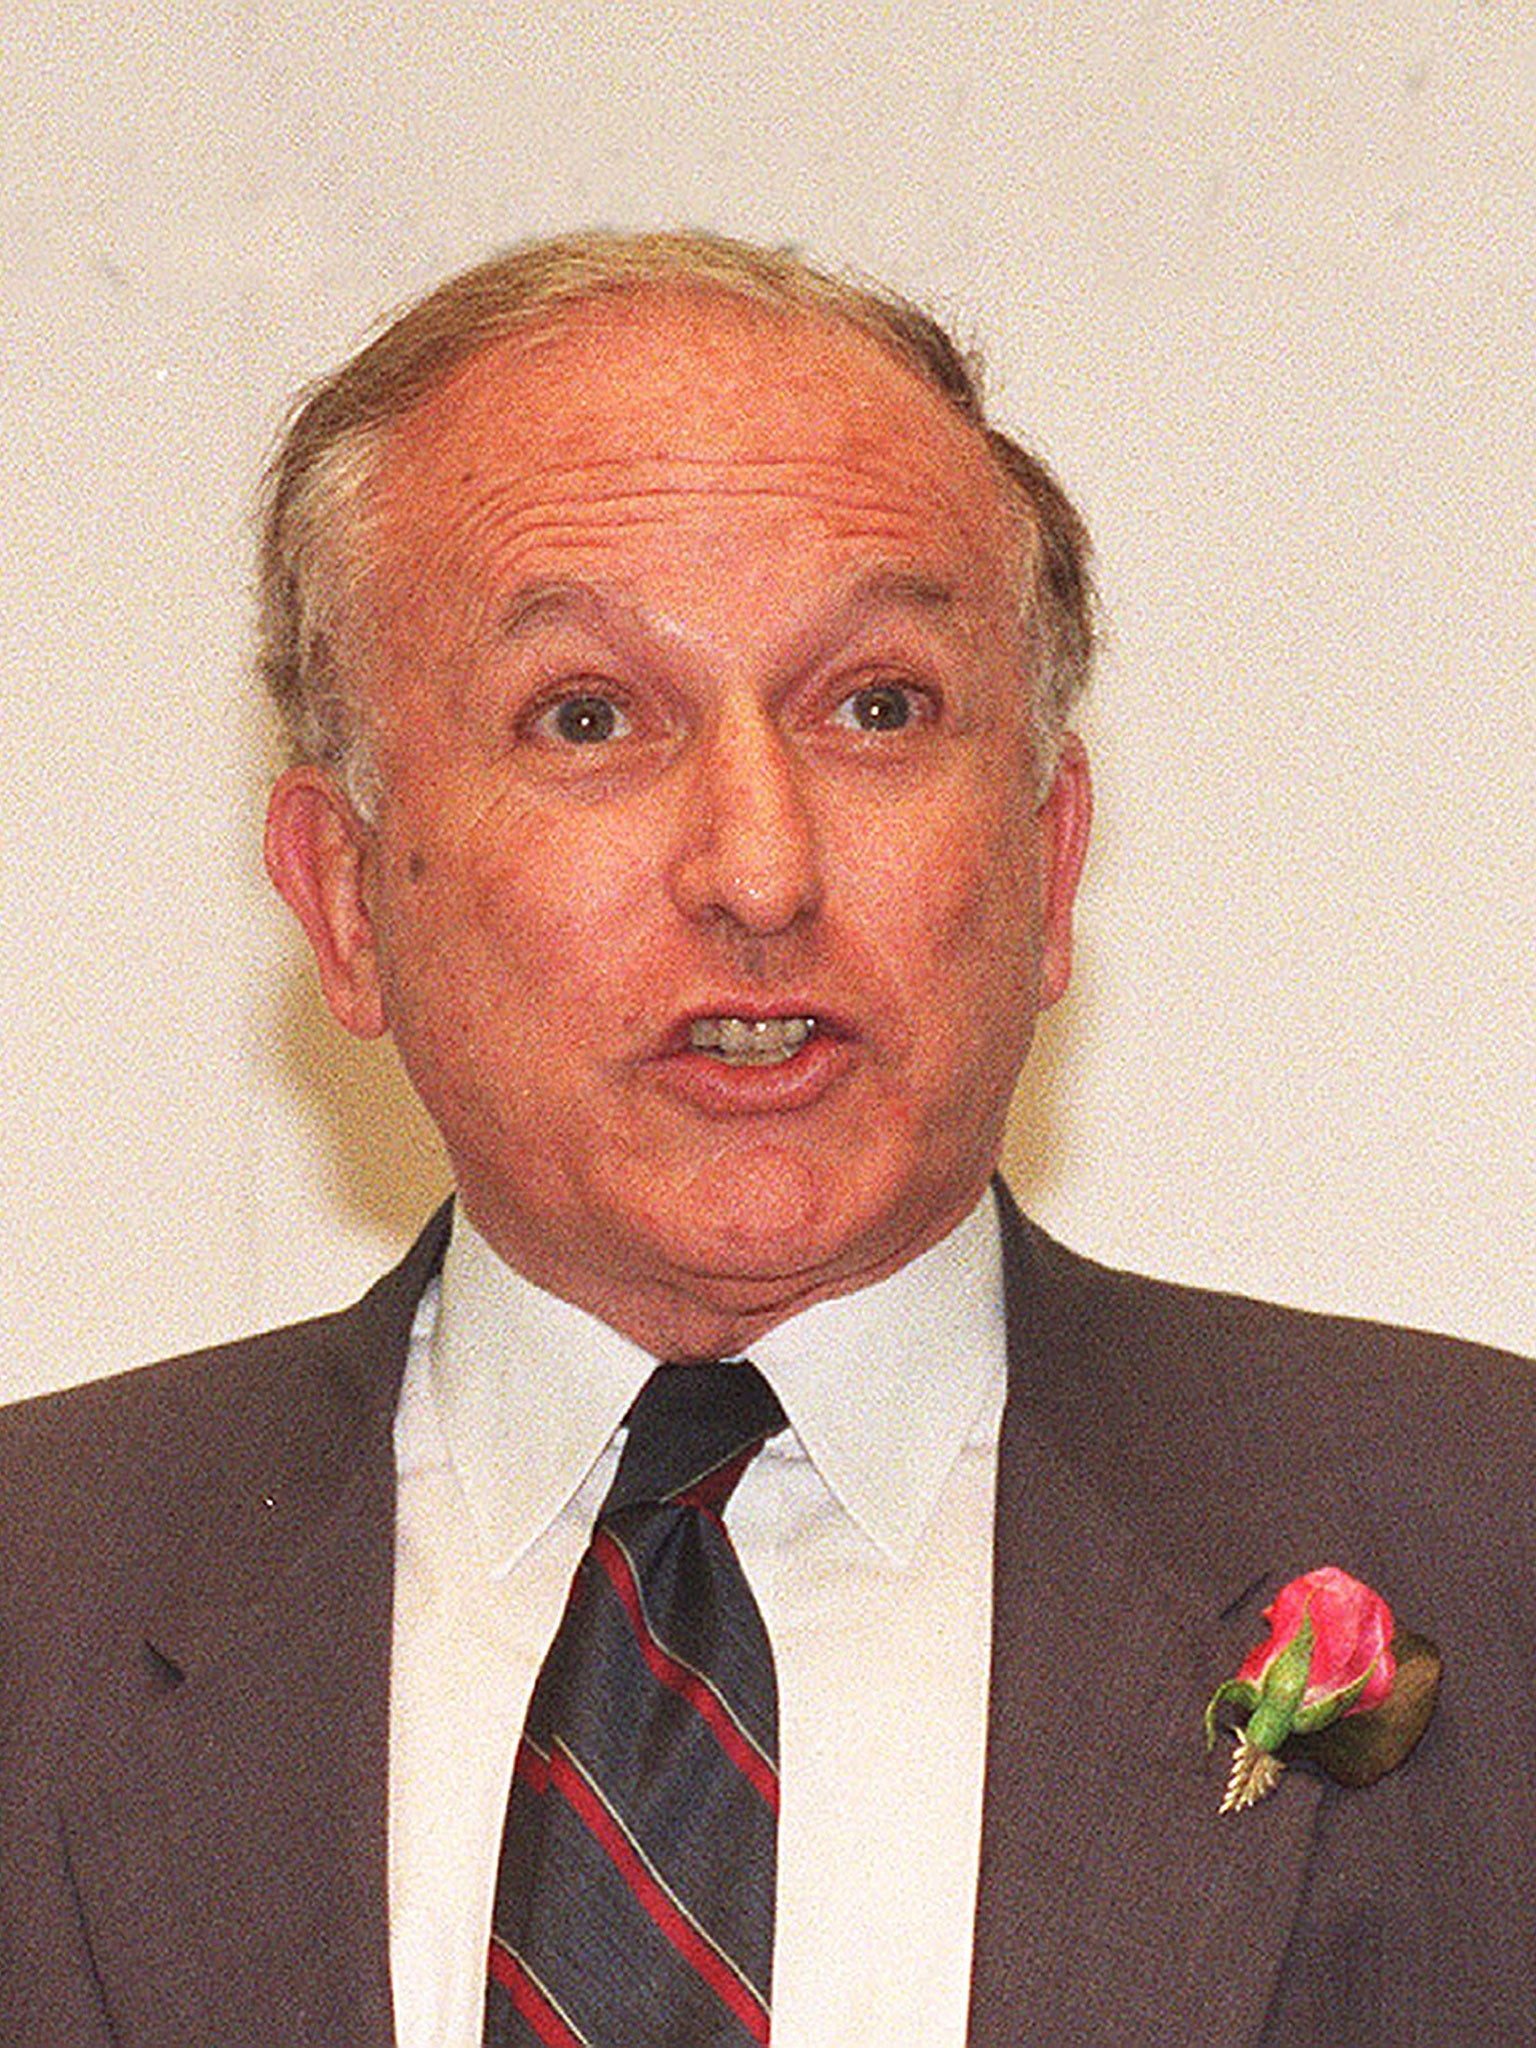 Janner was an MP in 1991 when he was accused of child abuse by the paedophile Frank Beck